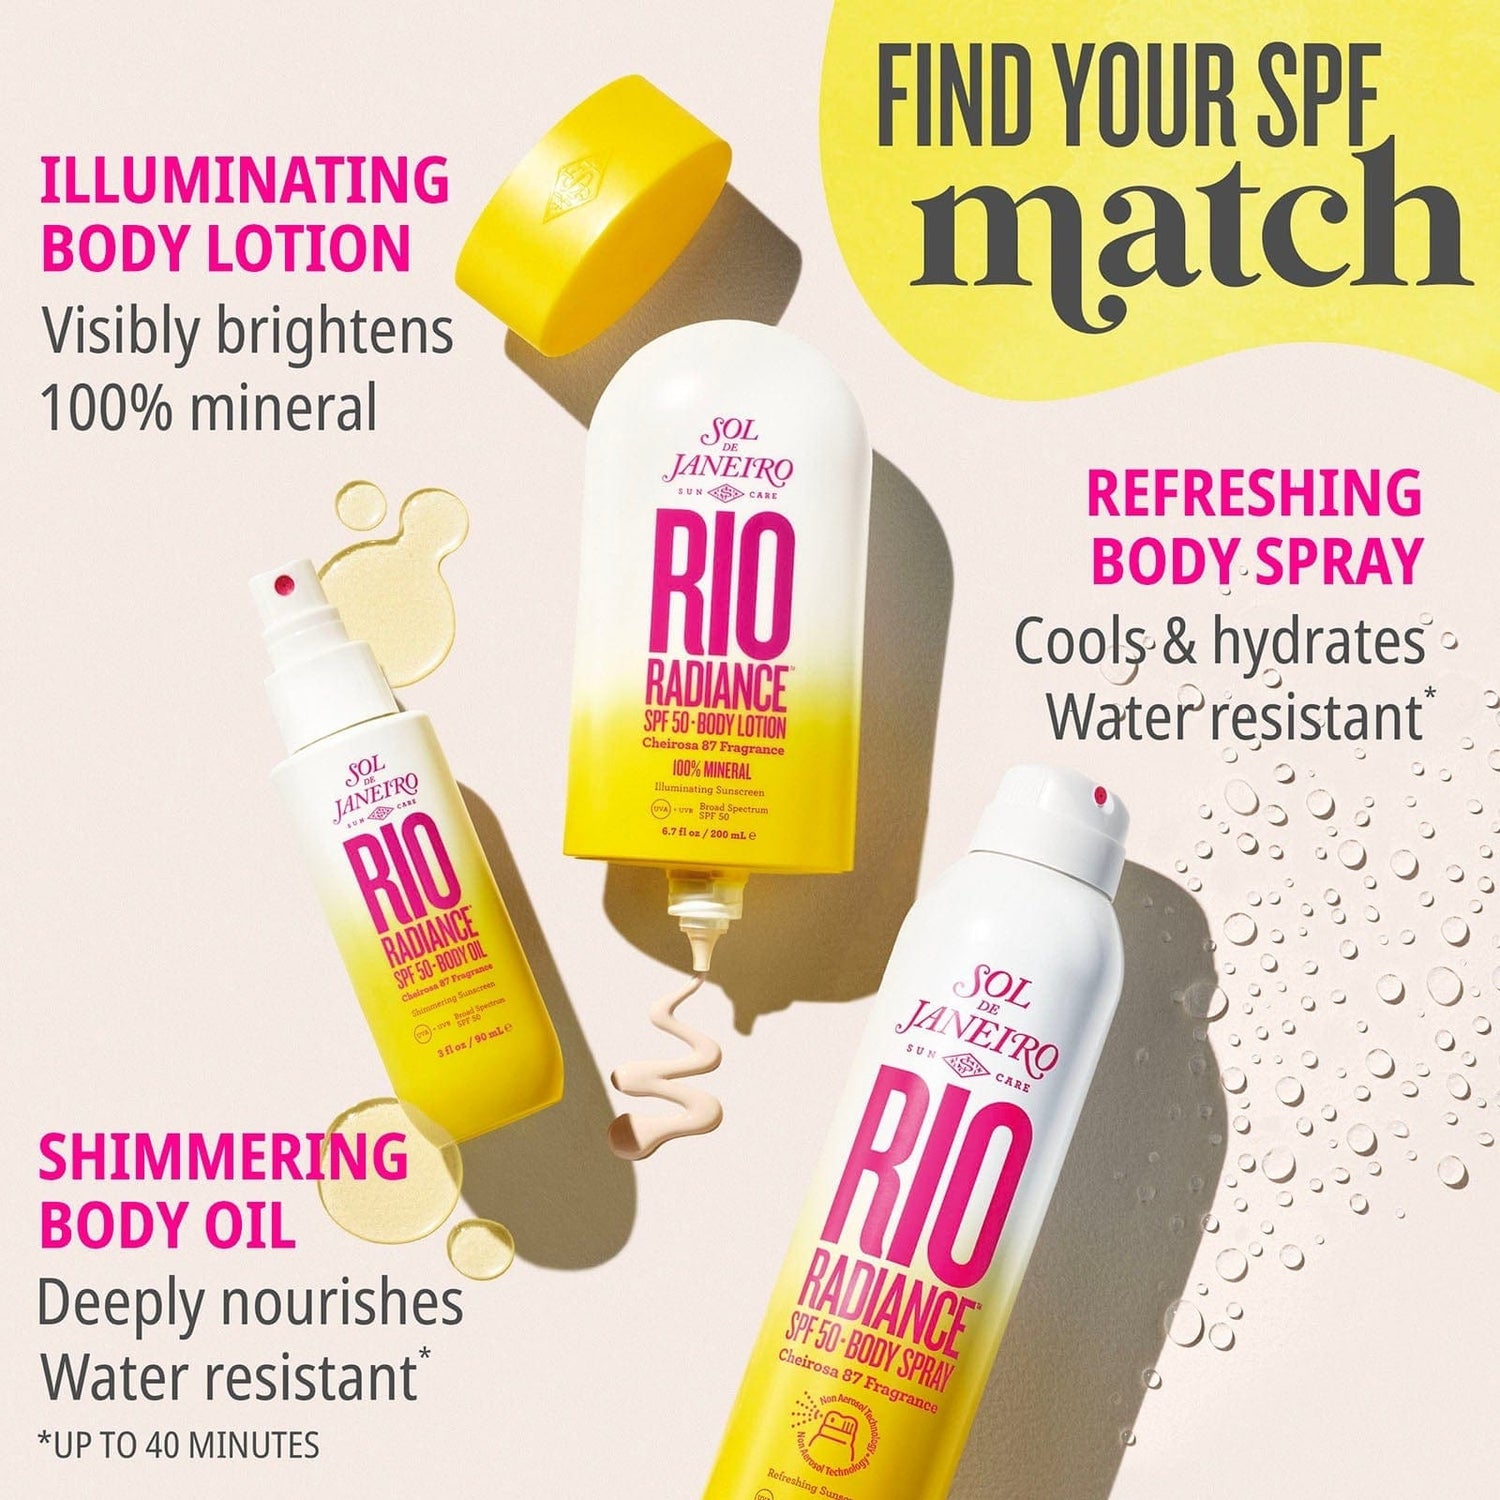 Find your SPF match: illuminating body lotion: visibly brightens 100% mineral, refreshing body spray - cools and hydrates, water resistant*, shimmering body oil - deeply nourishes, water resistant* up to 40 minutes